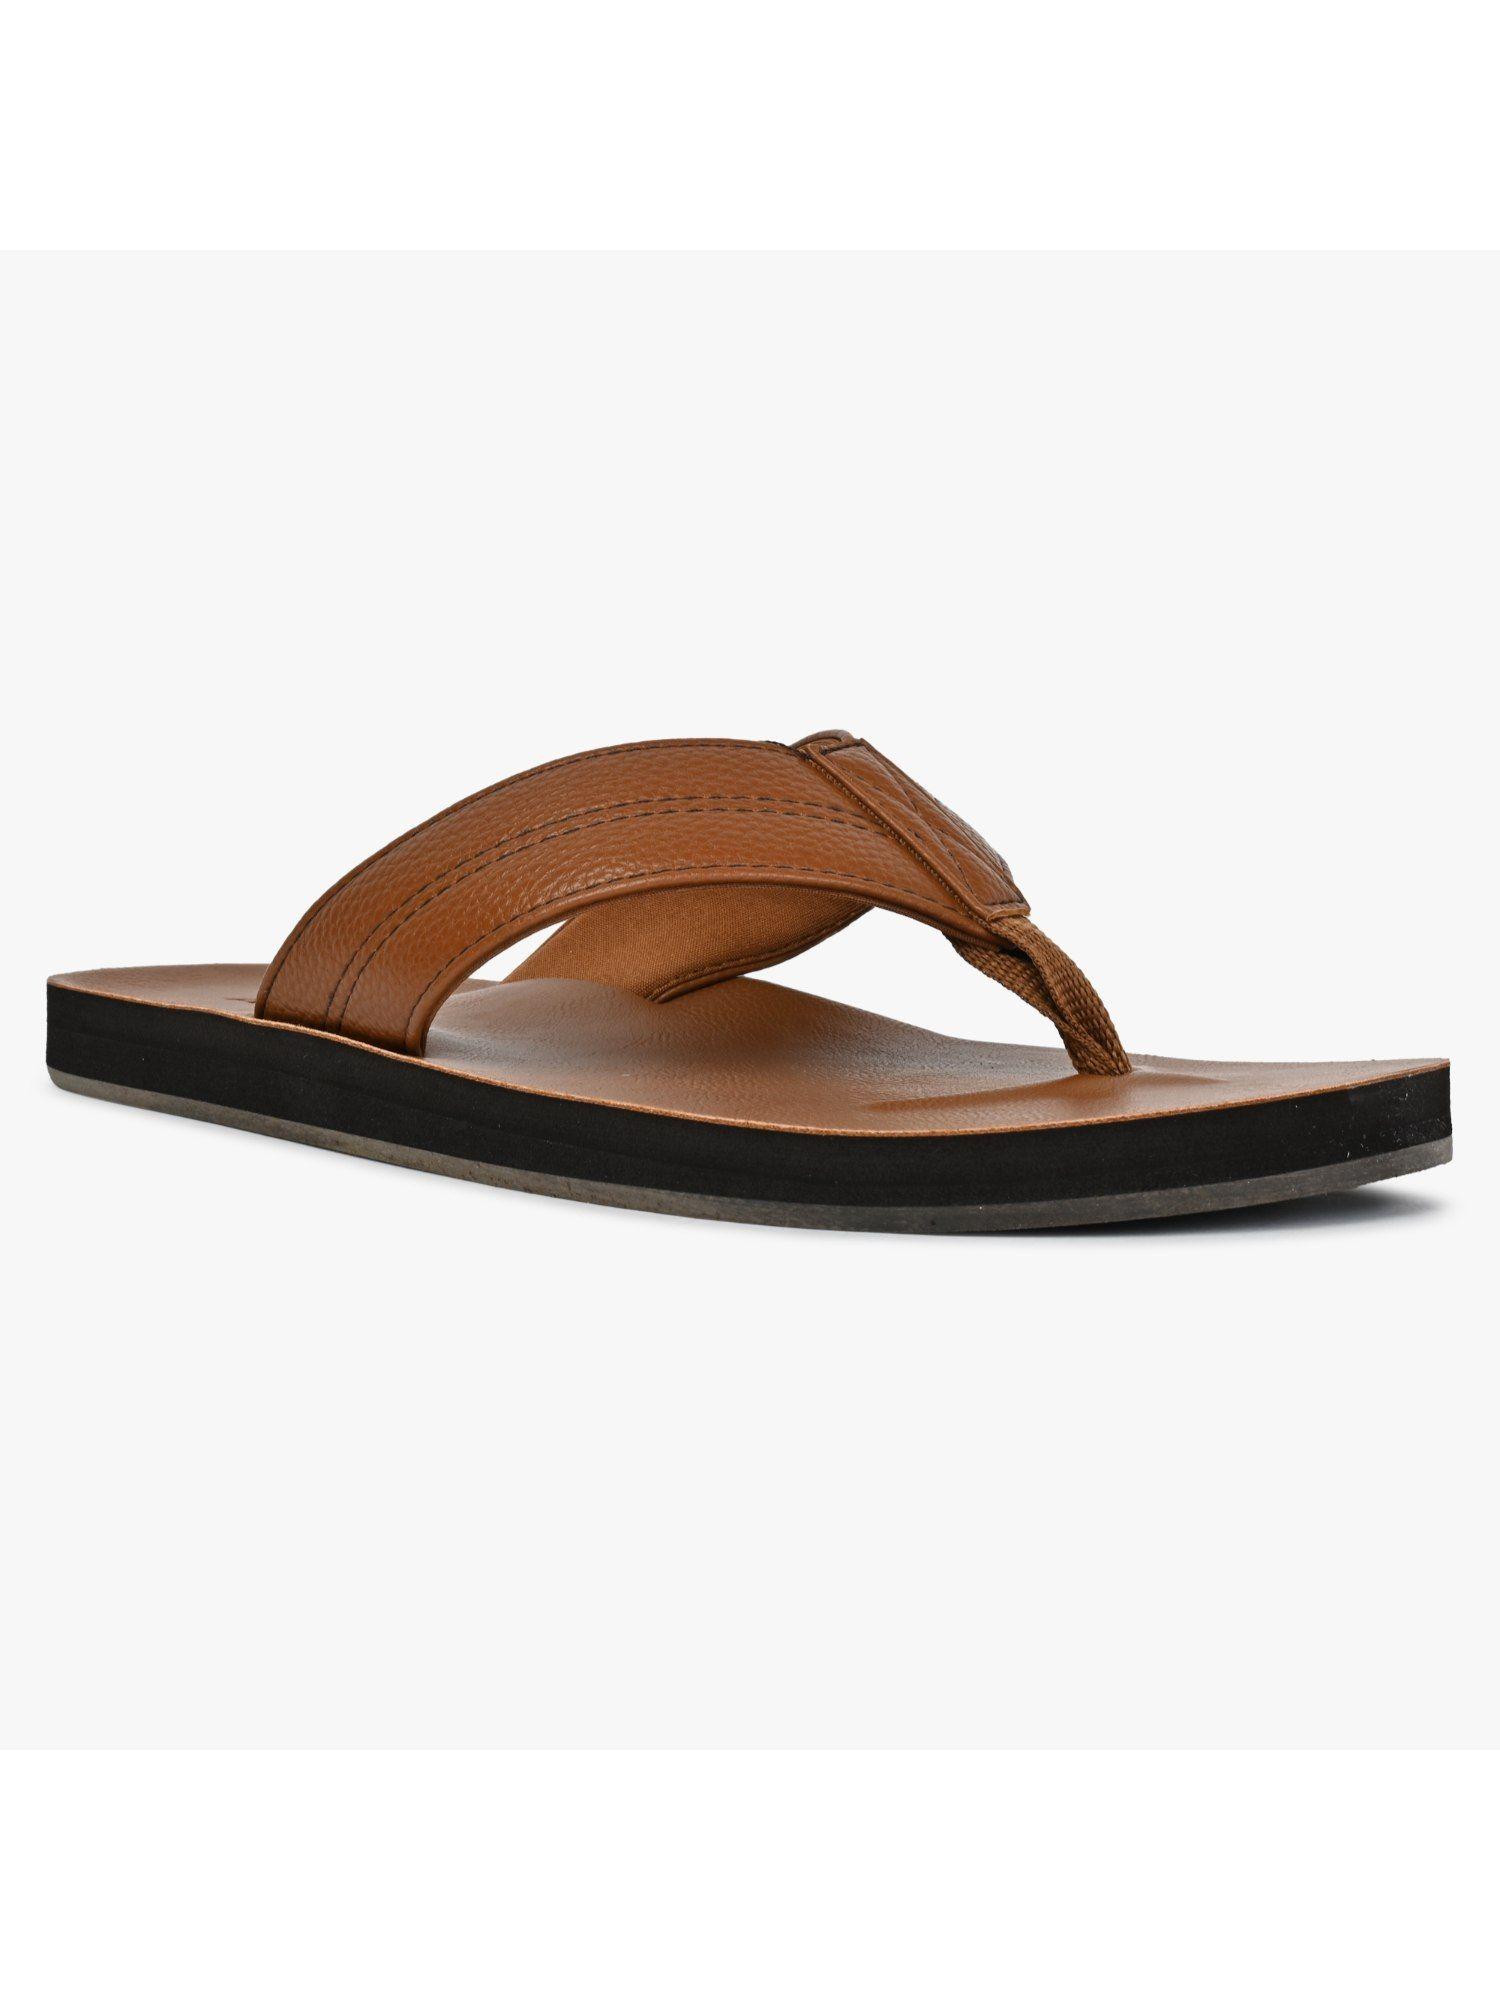 tribord220 tan synthetic flipflops